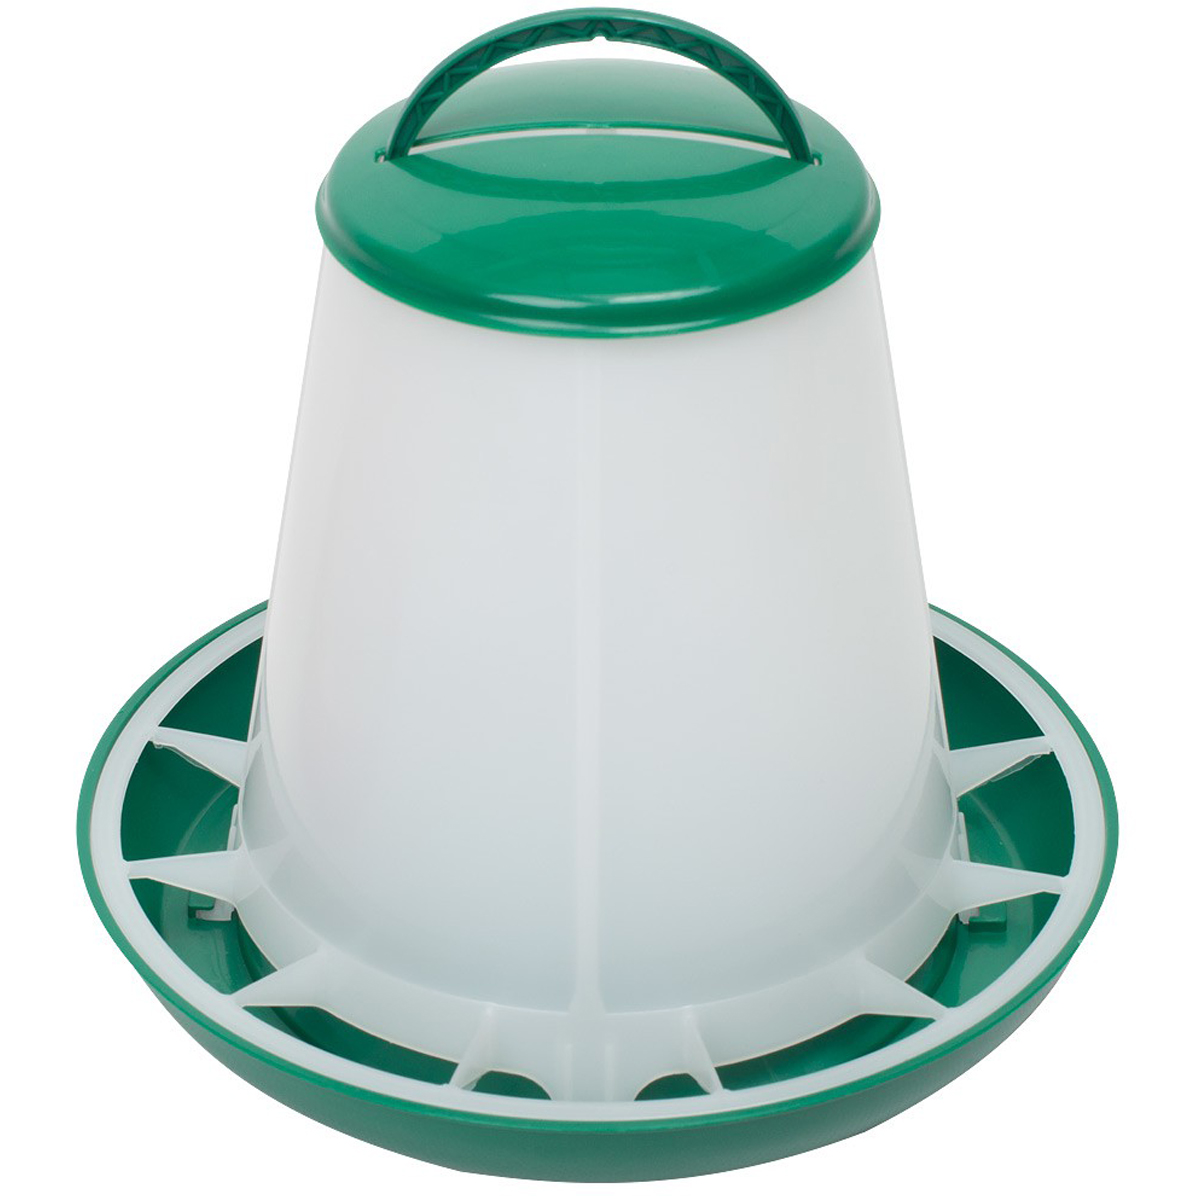 Poultry feeder with green lid